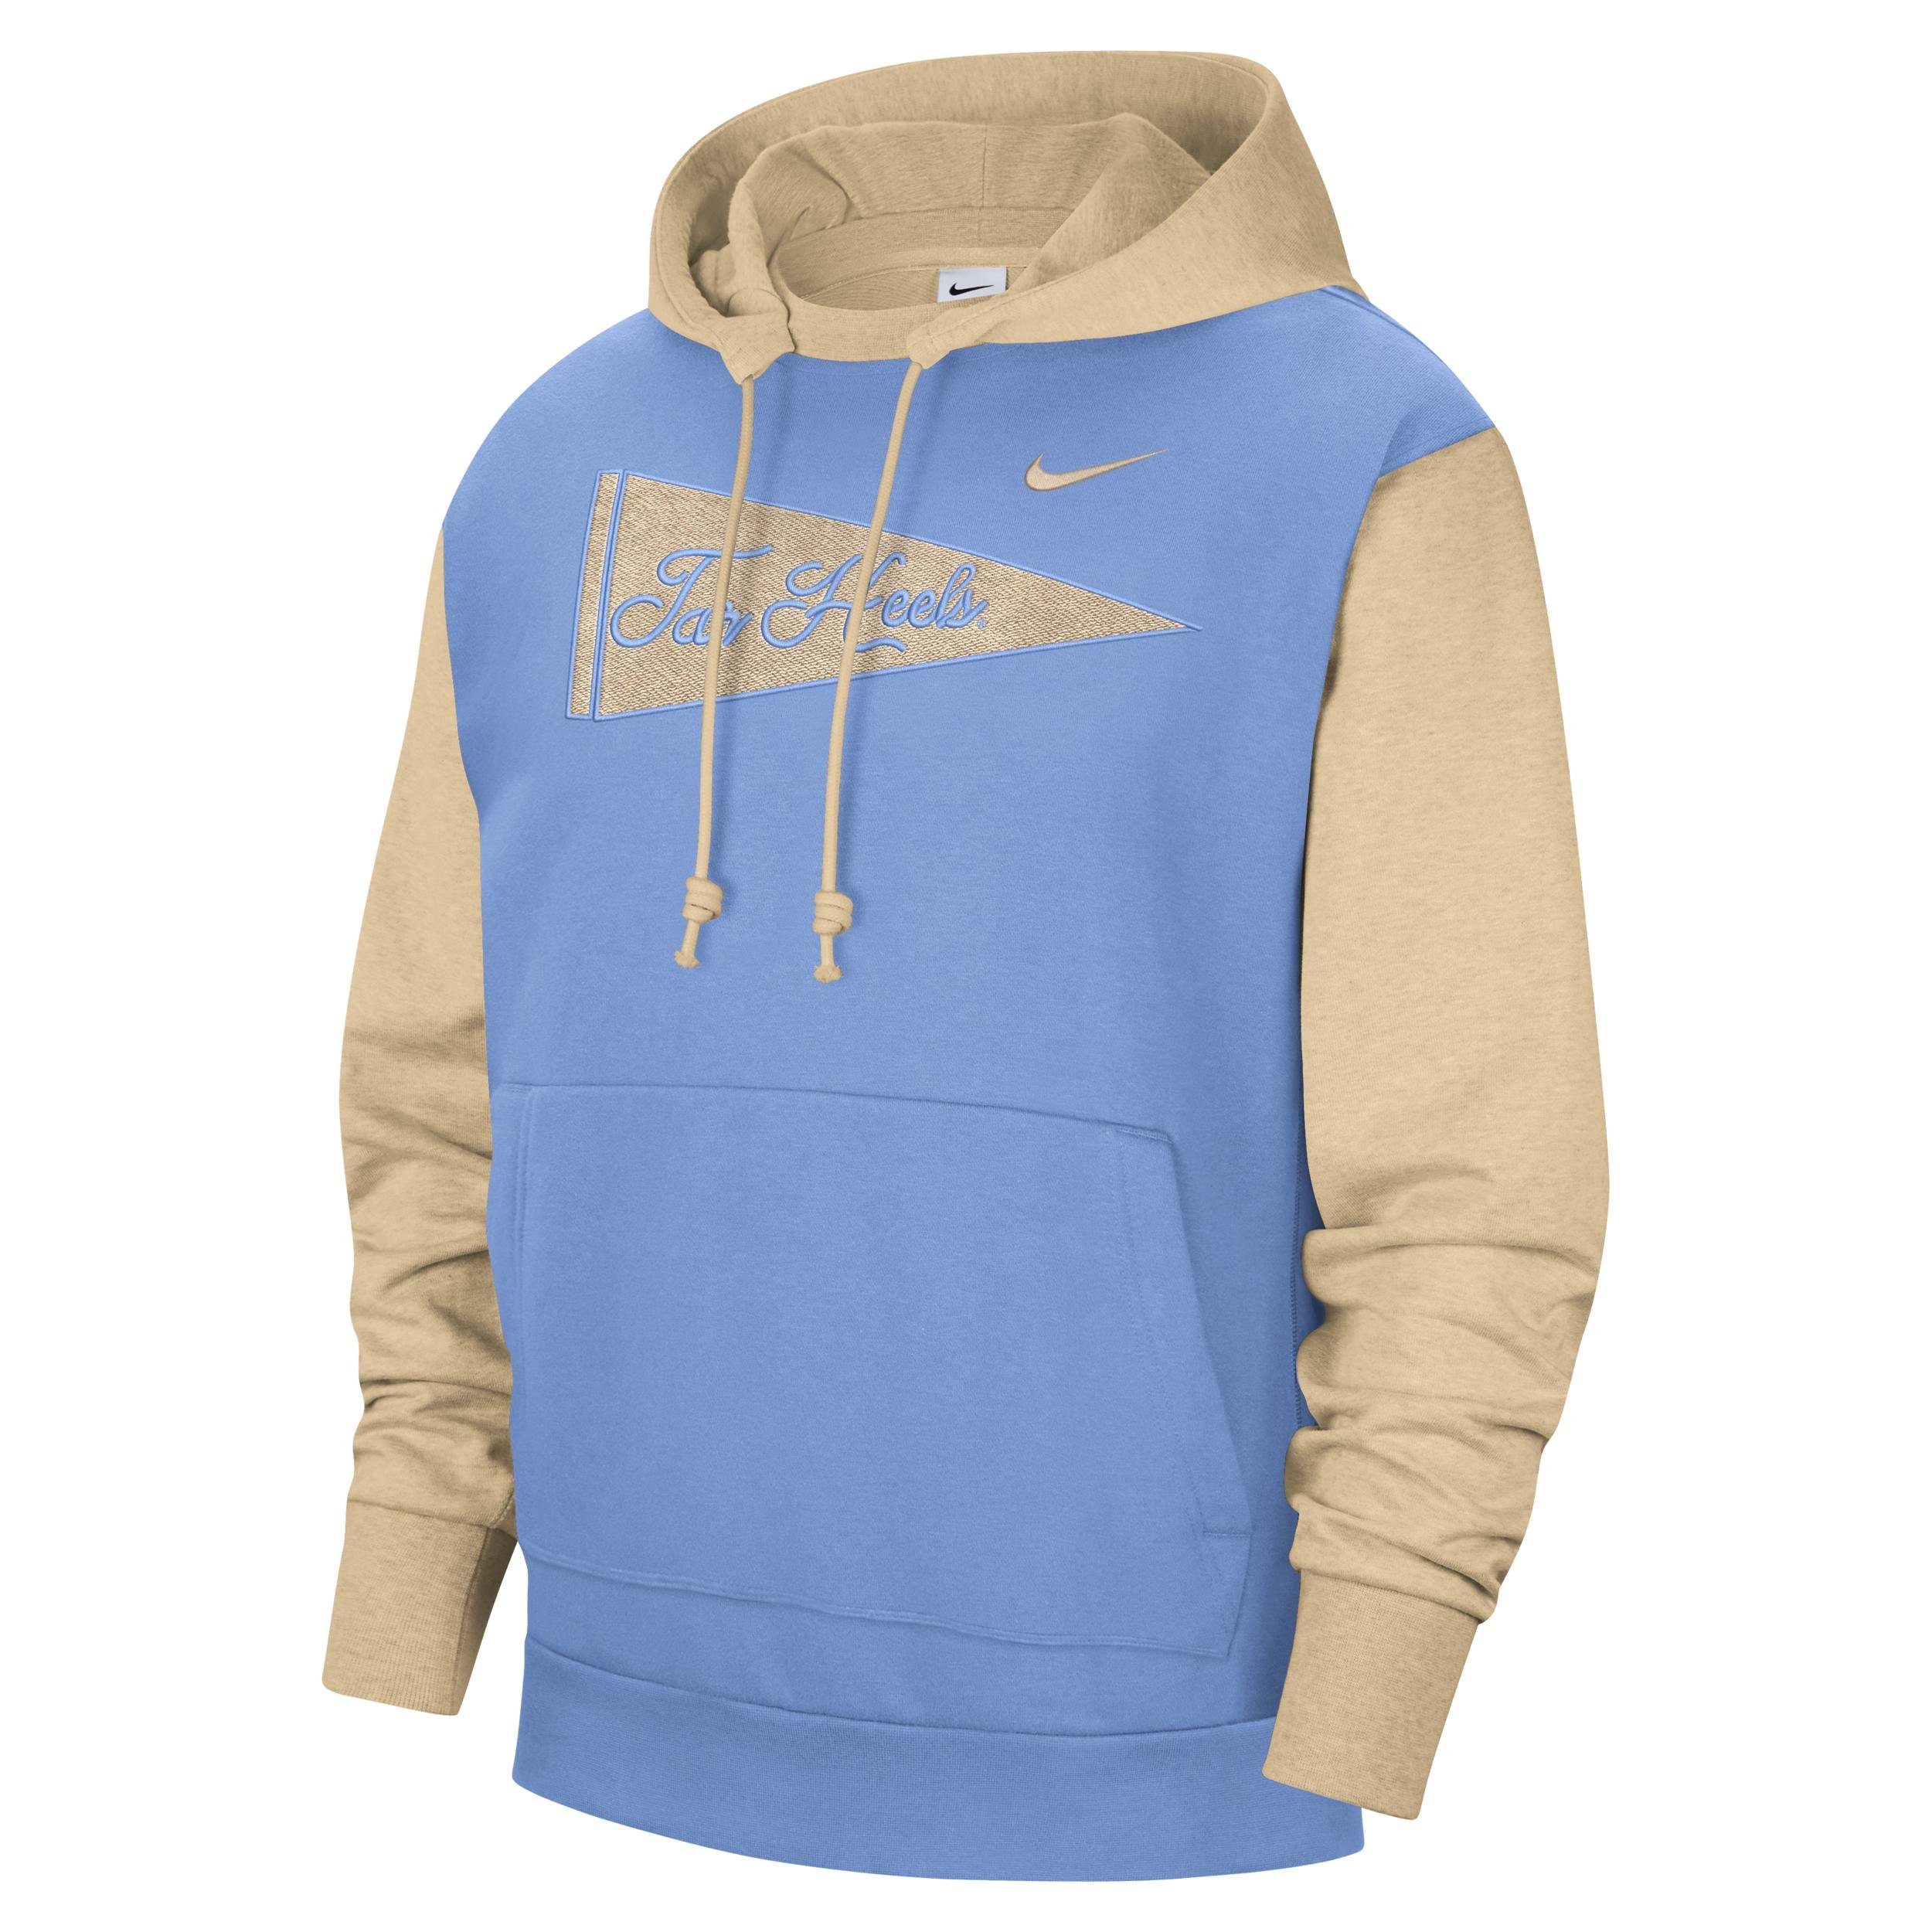 UNC Standard Issue Nike Men's College Pullover Hoodie by NIKE